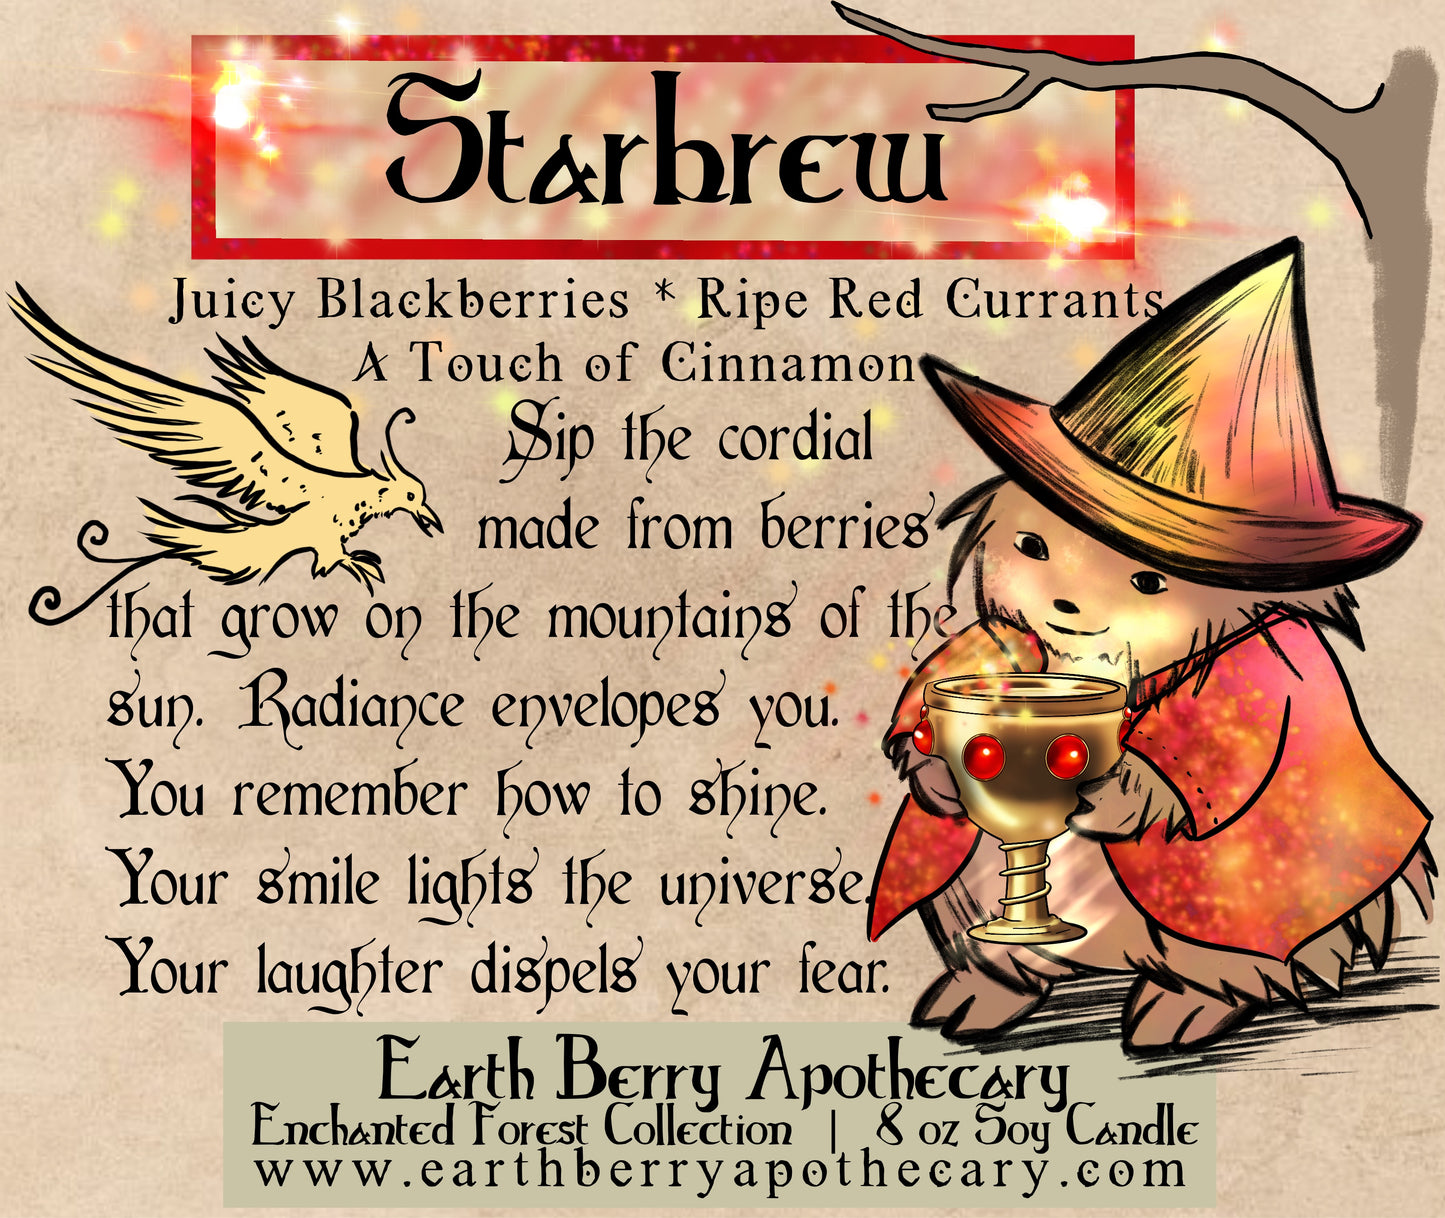 Starbrew soy candle scented with blackberries, currants, and cinnamon. A hedge witch holds a golden glowing goblet while a bird flies from the mountains of the sun.